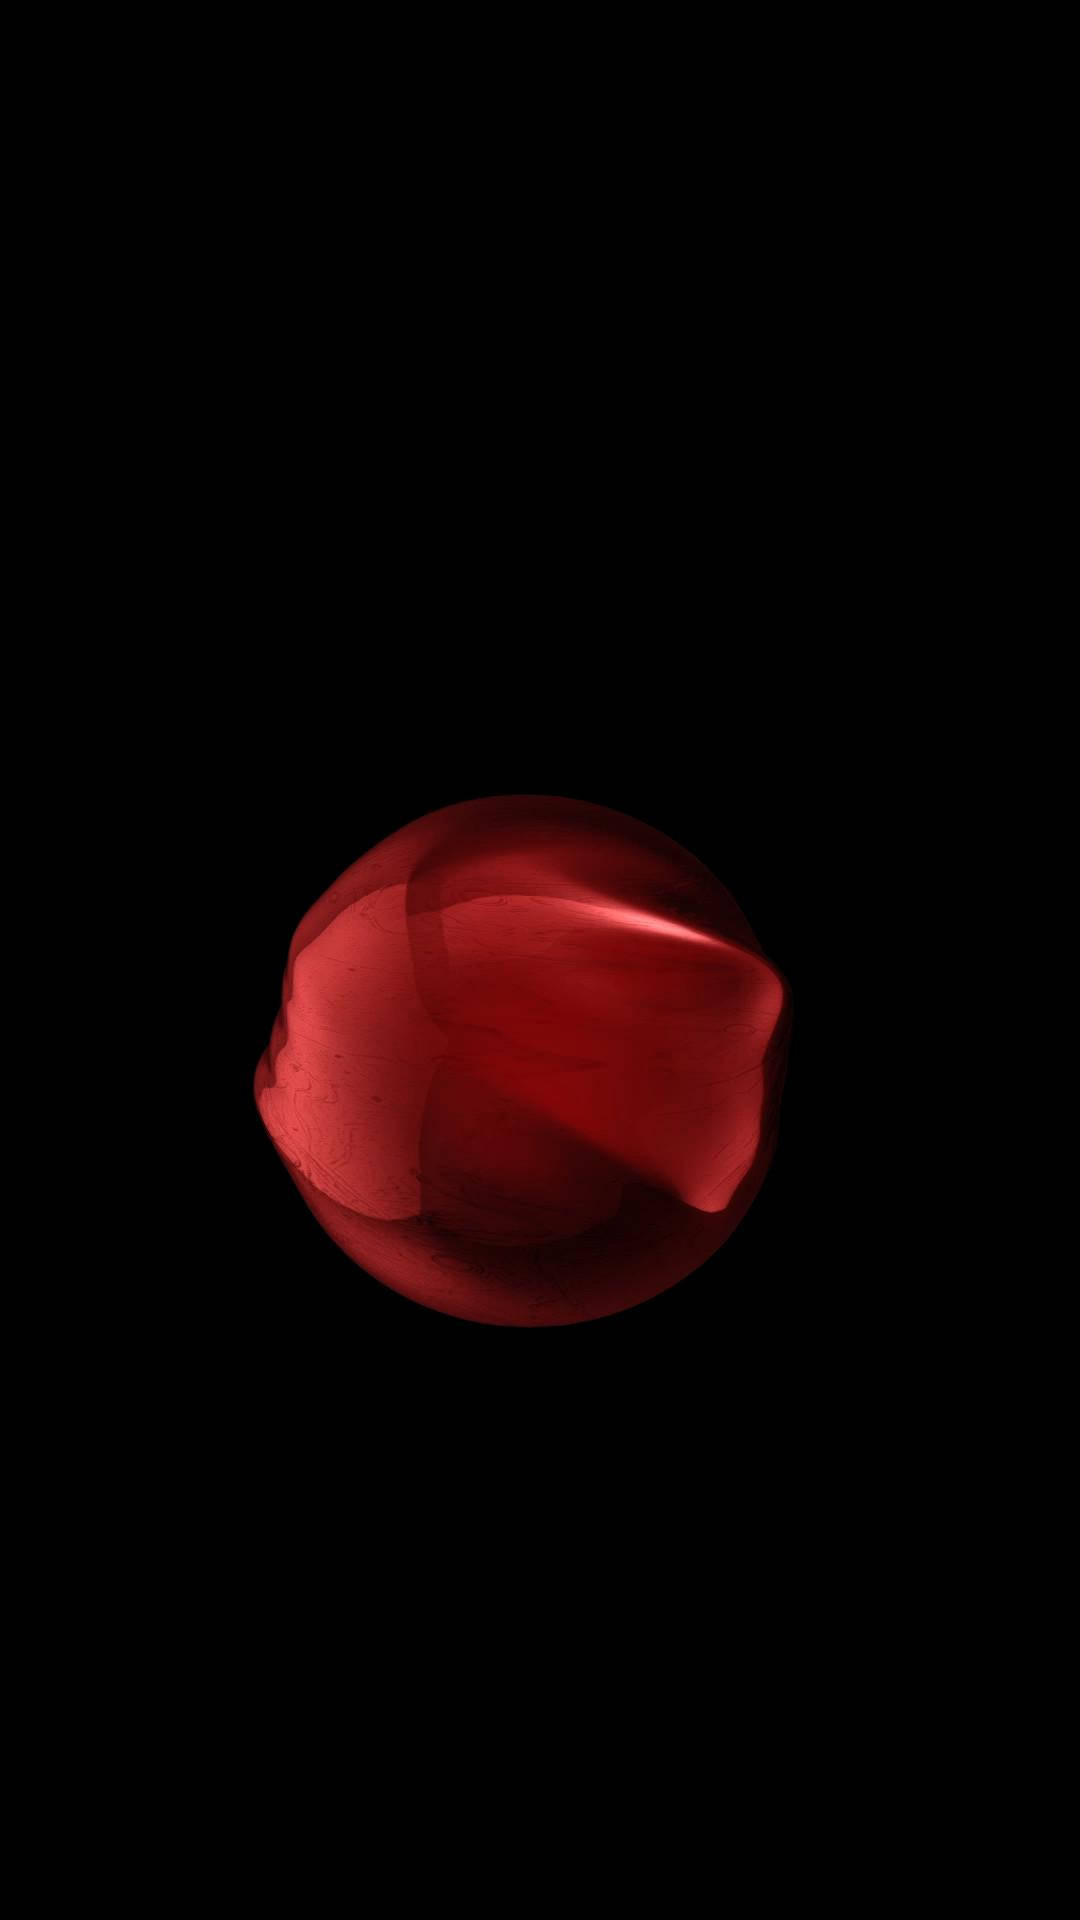 Shiny Apple Red Iphone Wallpaper